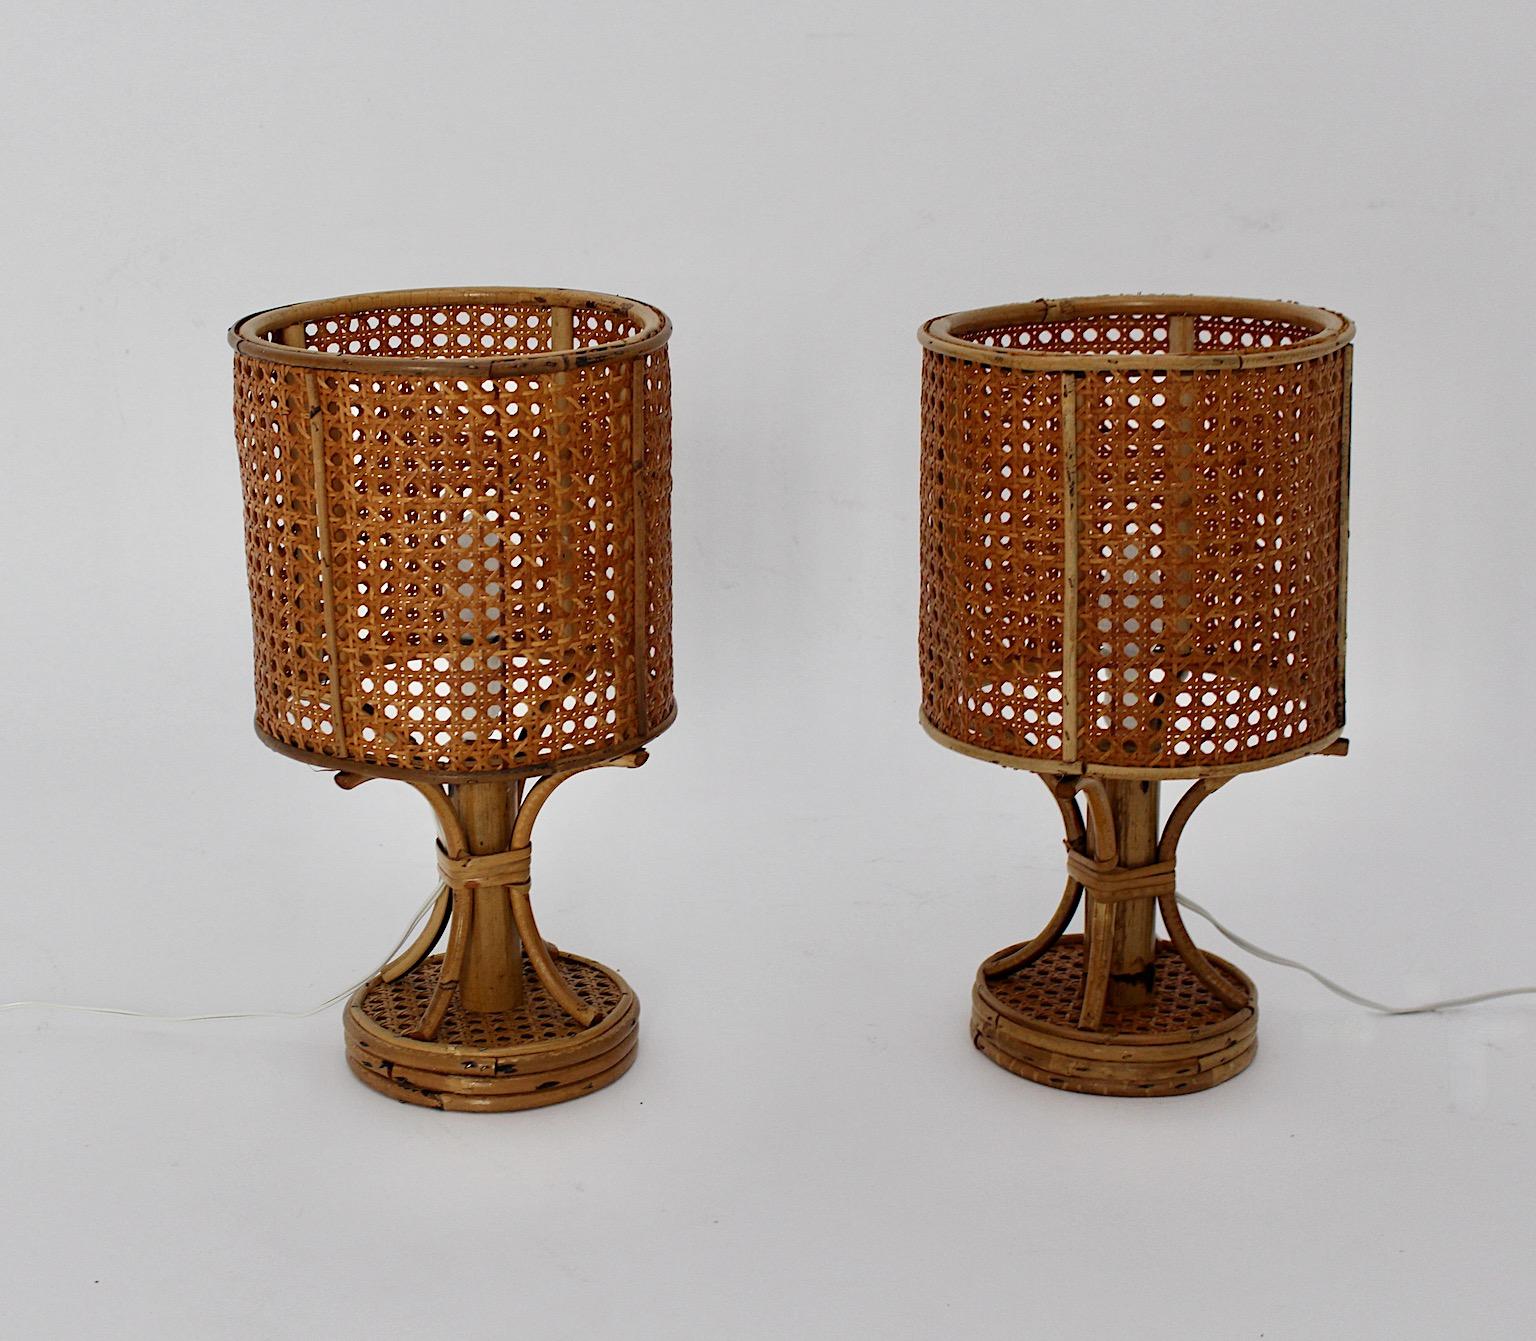 Riviera style Organic vintage pair of table lamps or nightstand lamps from rattan and bamboo designed and executed in Italy 1970s.
A wonderful pair of table lamps or nightstand lamps with lamp shades from Viennese mesh, while the base shows rattan